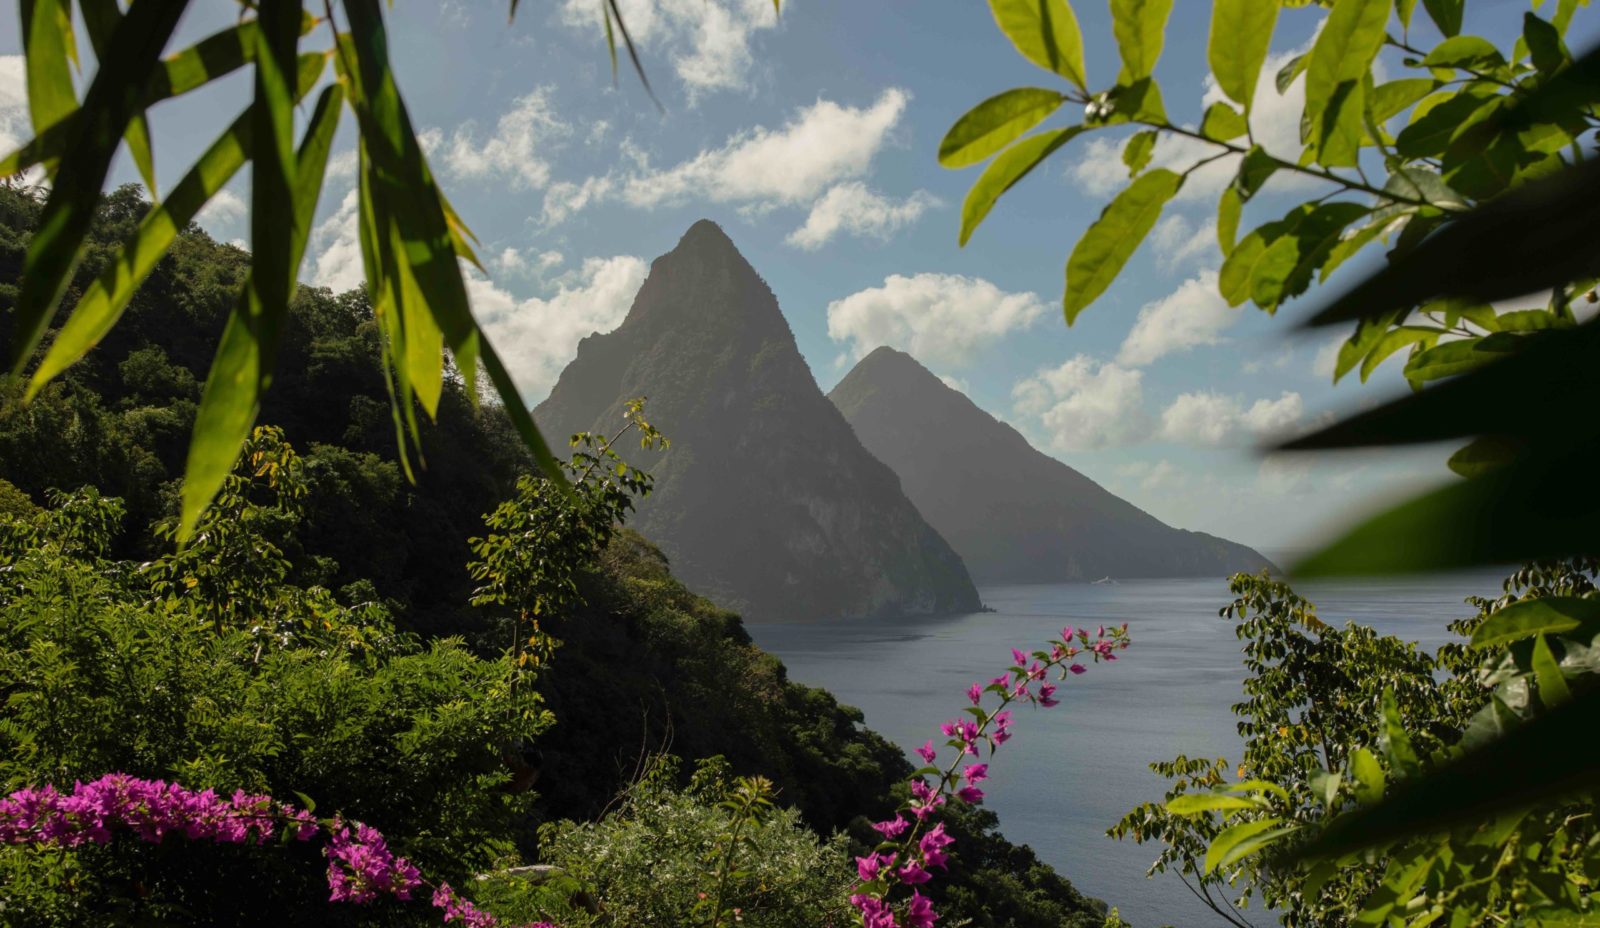 The Pitons appear close enough to touch, viewed through flowers and foliage in the garden at Cosmos St Lucia